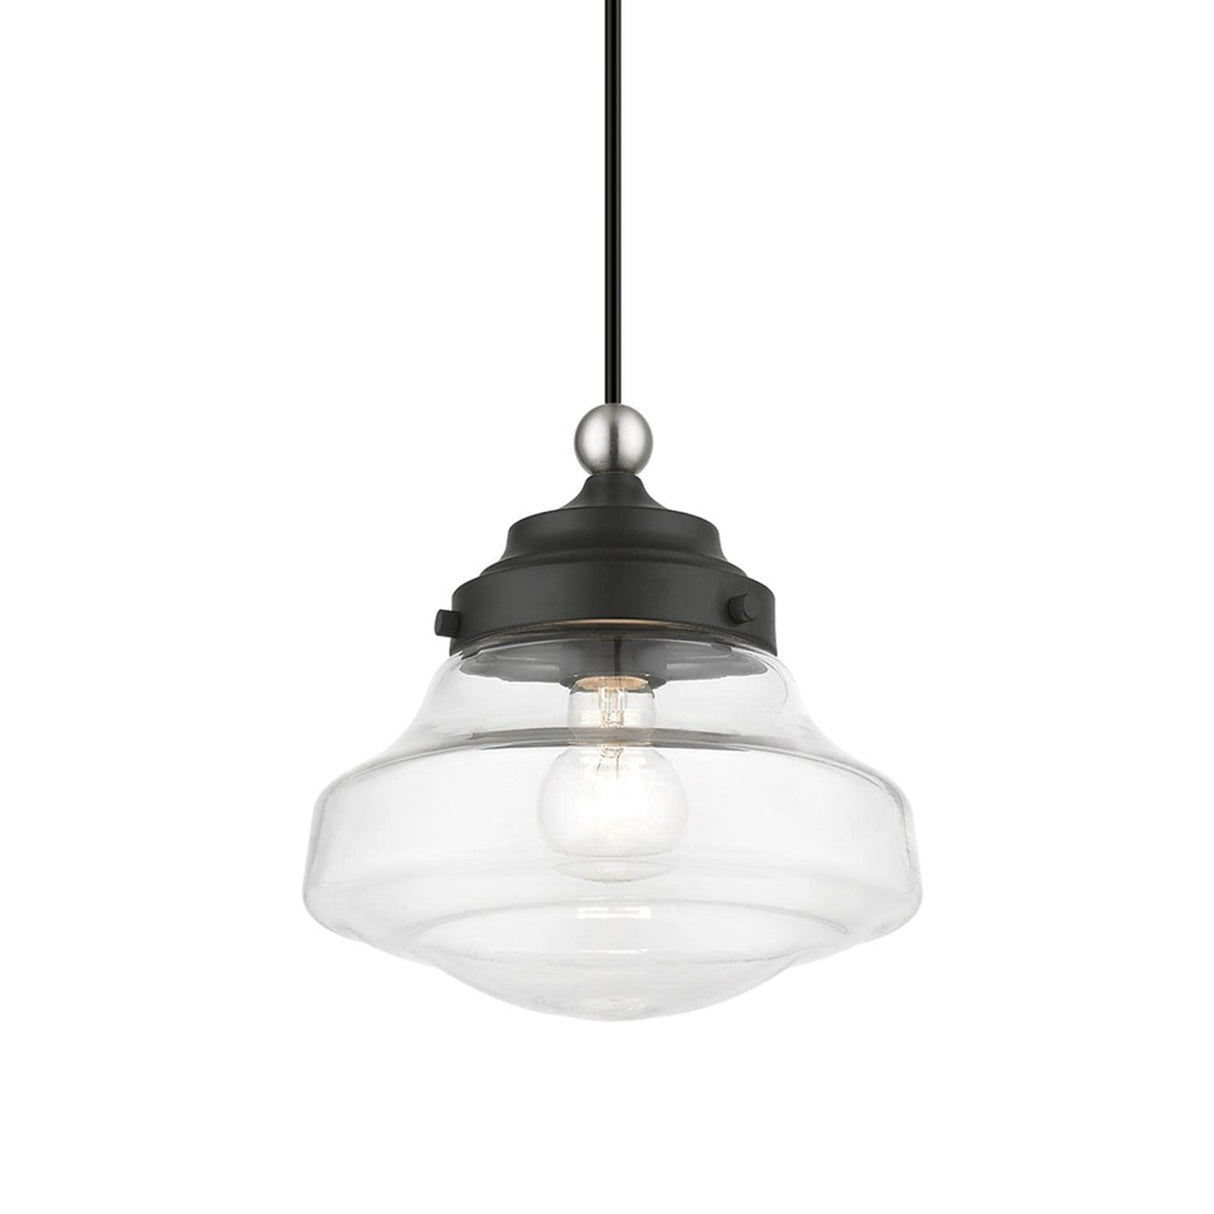 Avondale 1 Light Mini Pendant in Black with Brushed Nickel Accent (41293-04)